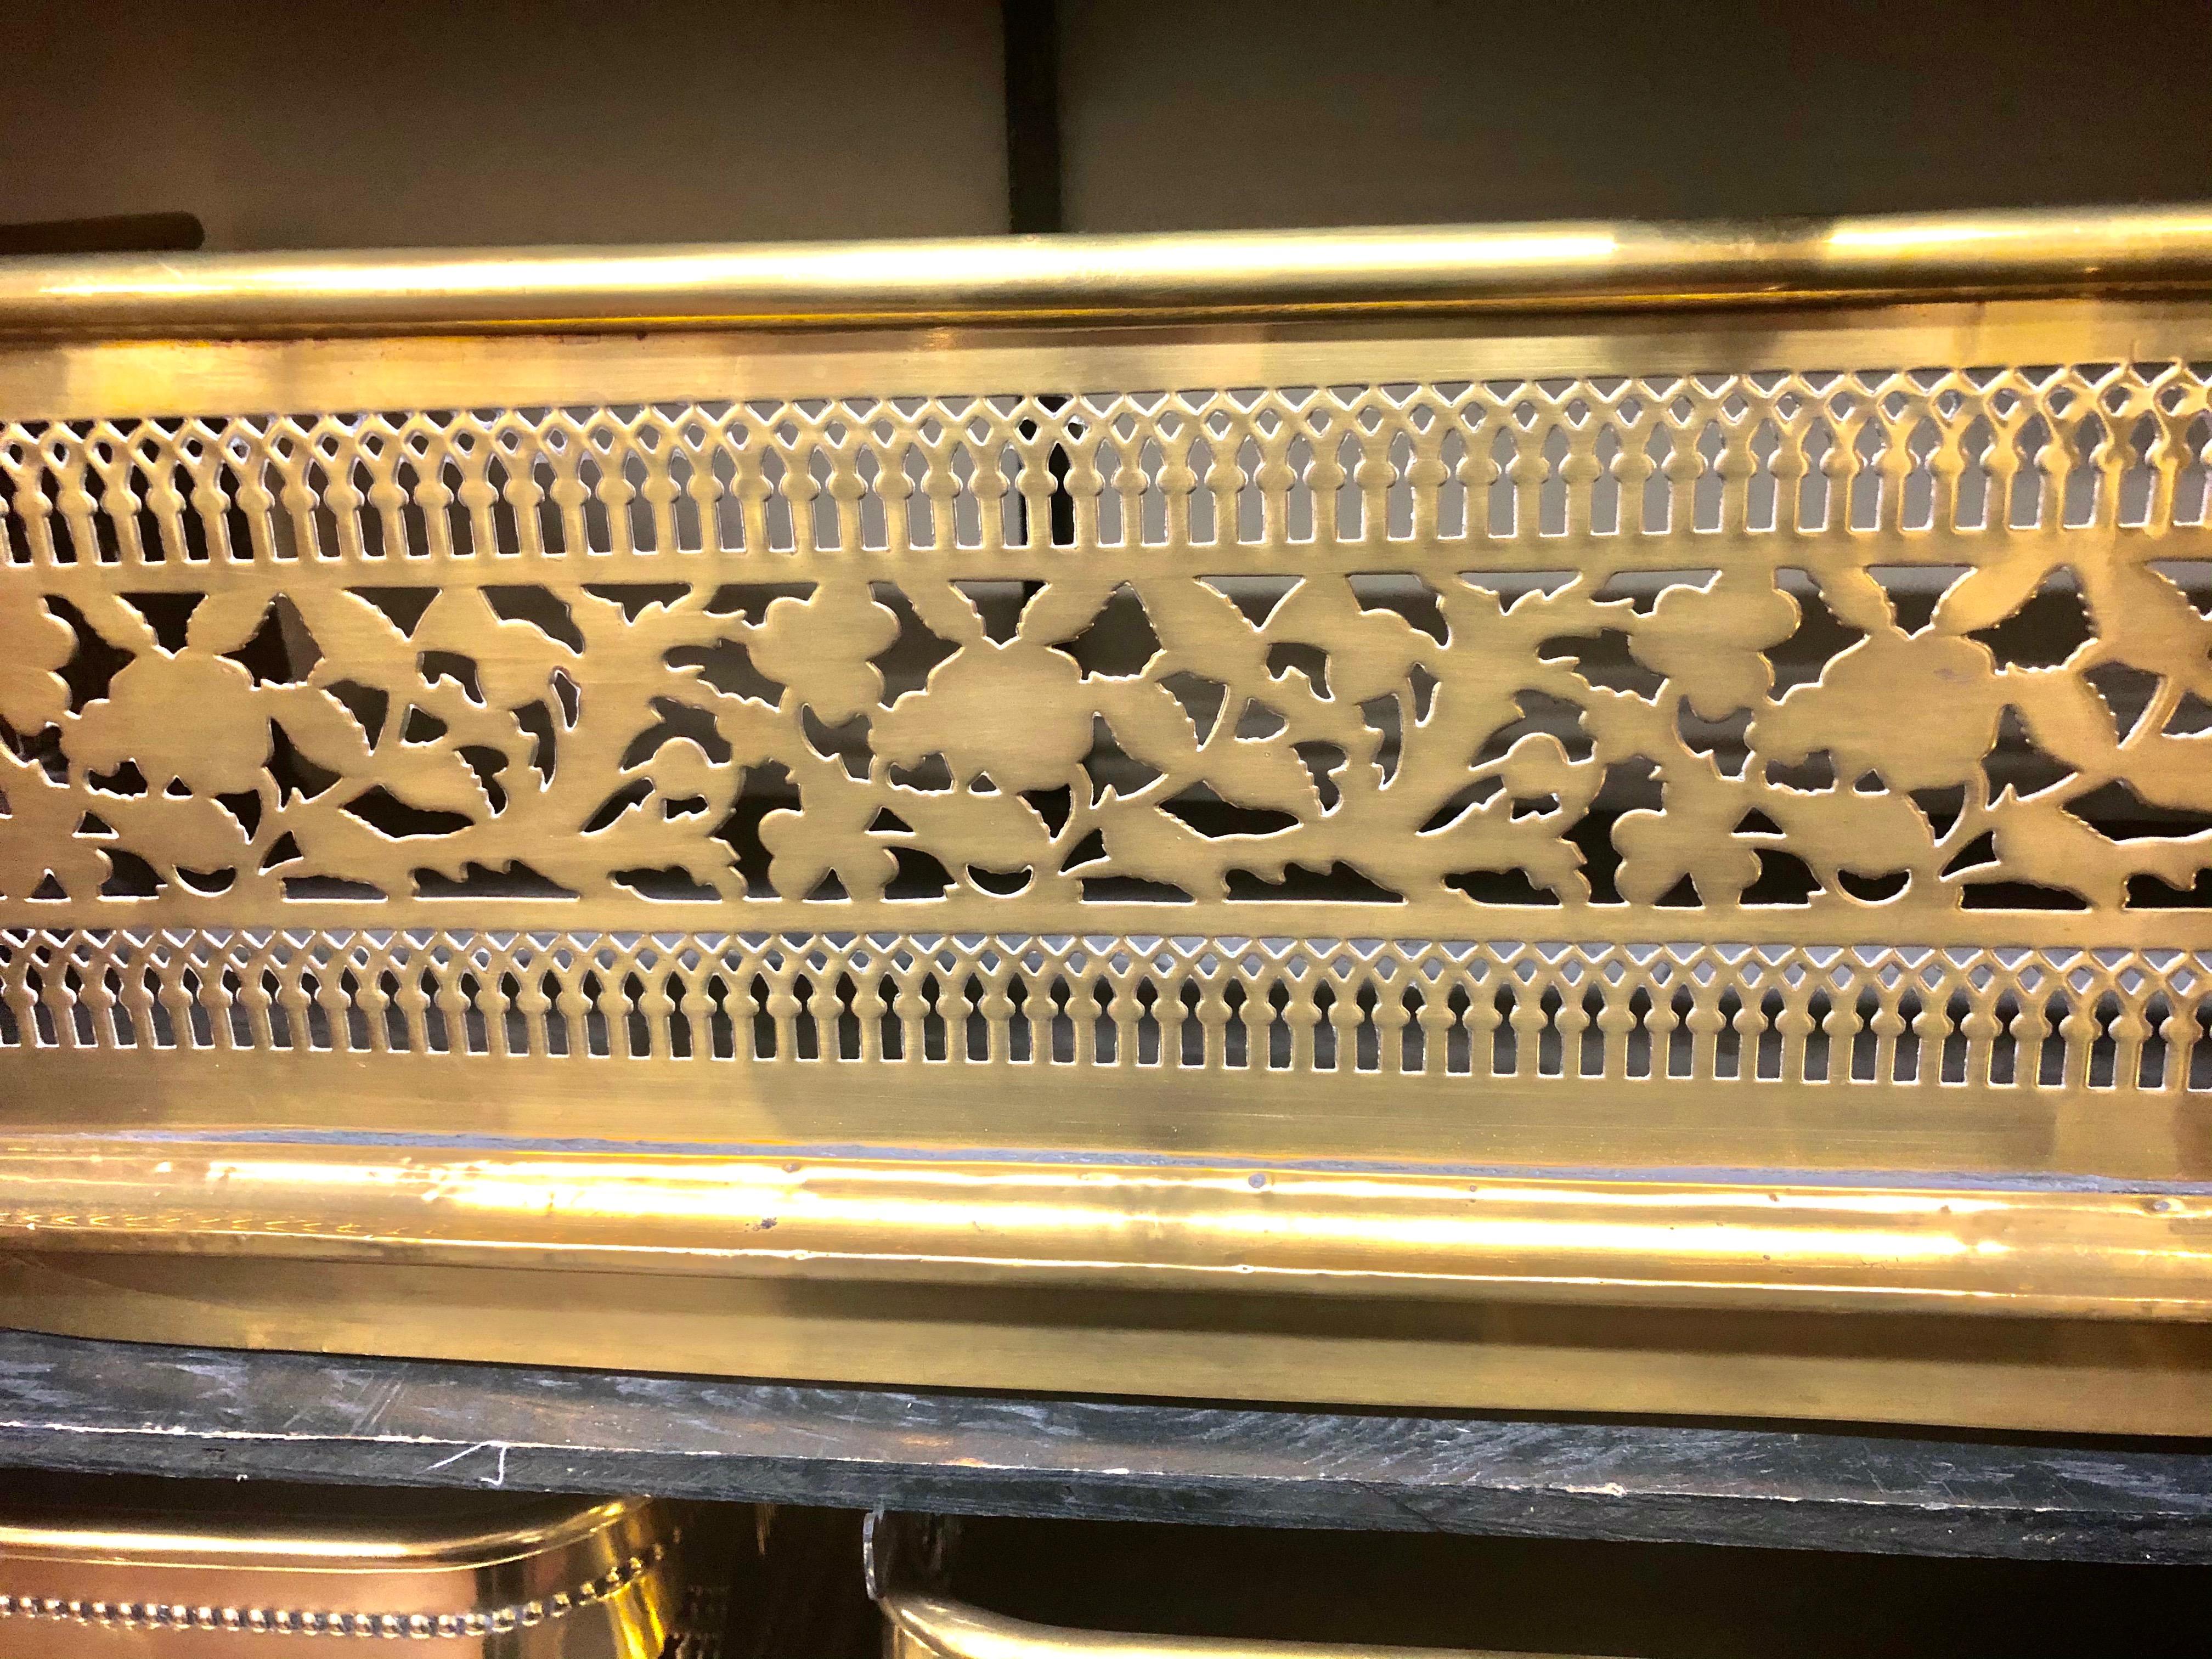 Wonderful late Geo. IV pierced brass fireplace fender with leaf and ivy pierced motif.
Beautiful condition.